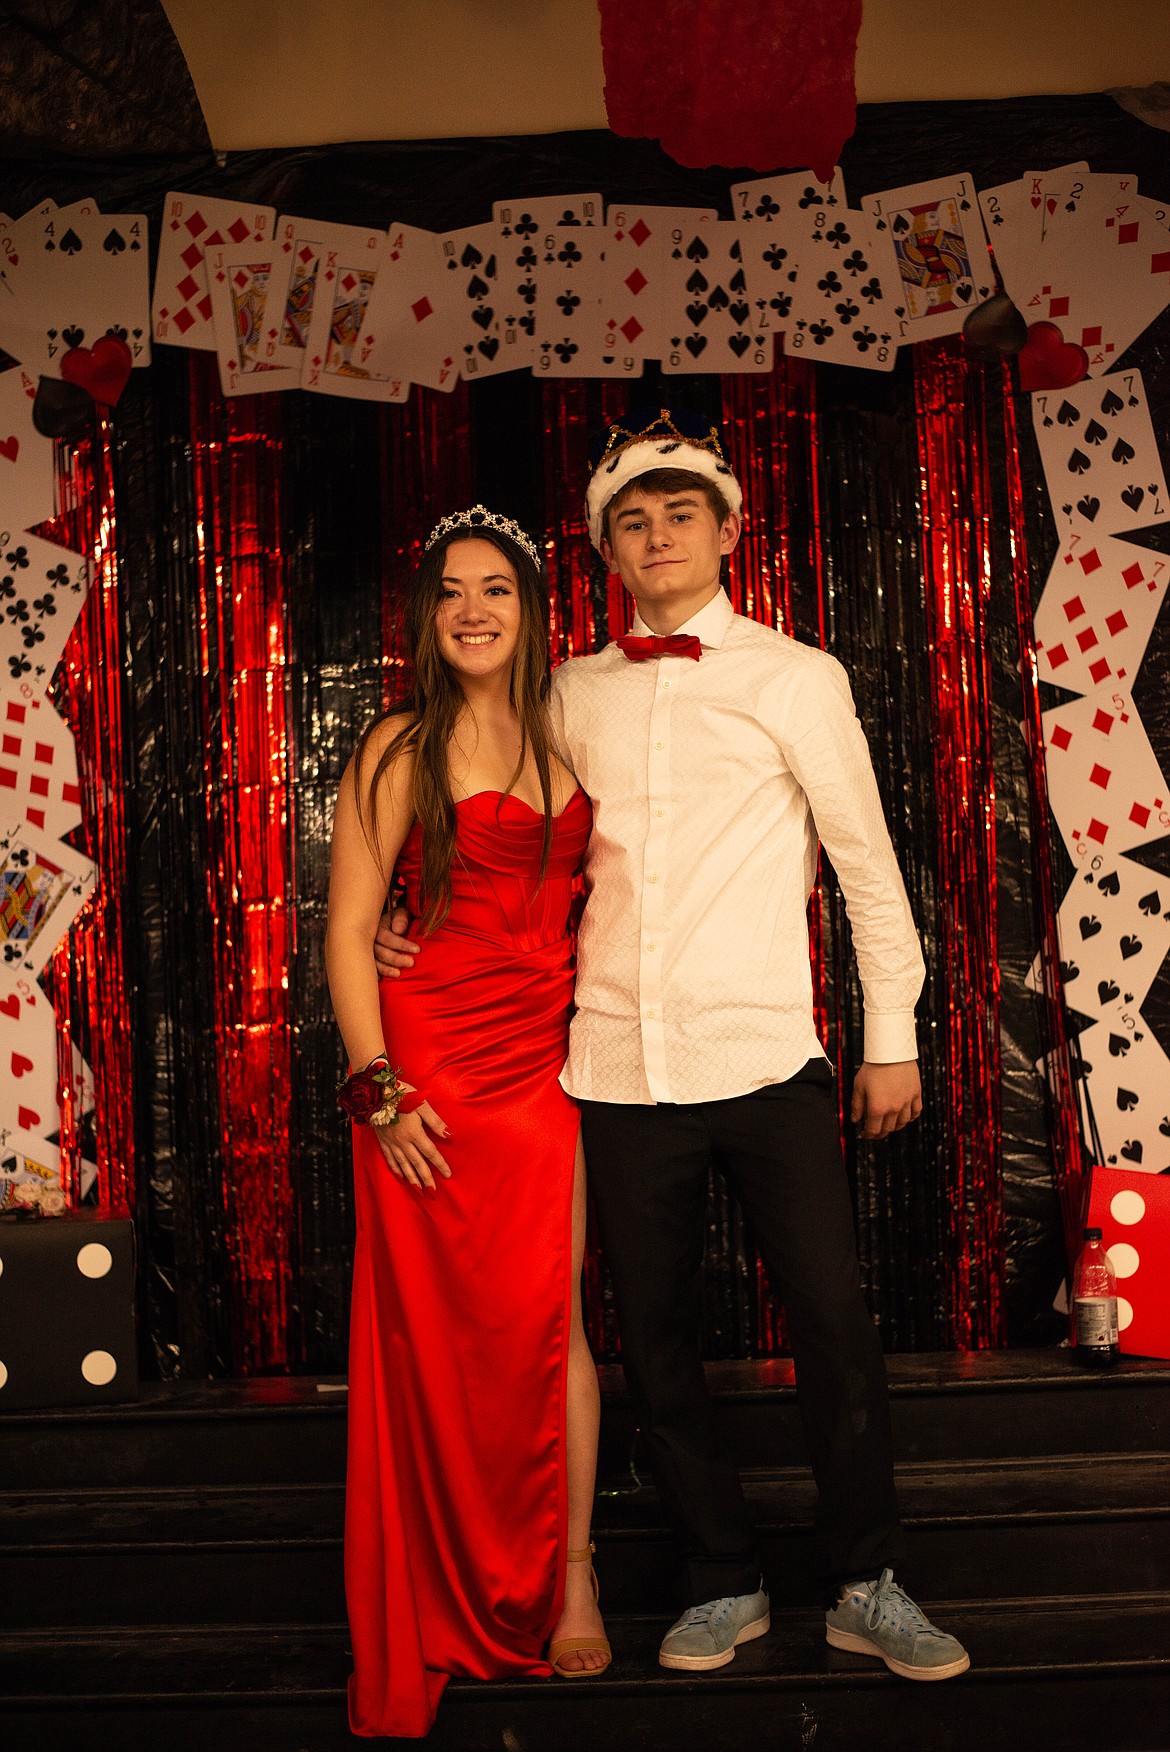 Superior High School prom king and queen Micah Acker and Abby Wheeler. (Tamara Durovey photo)